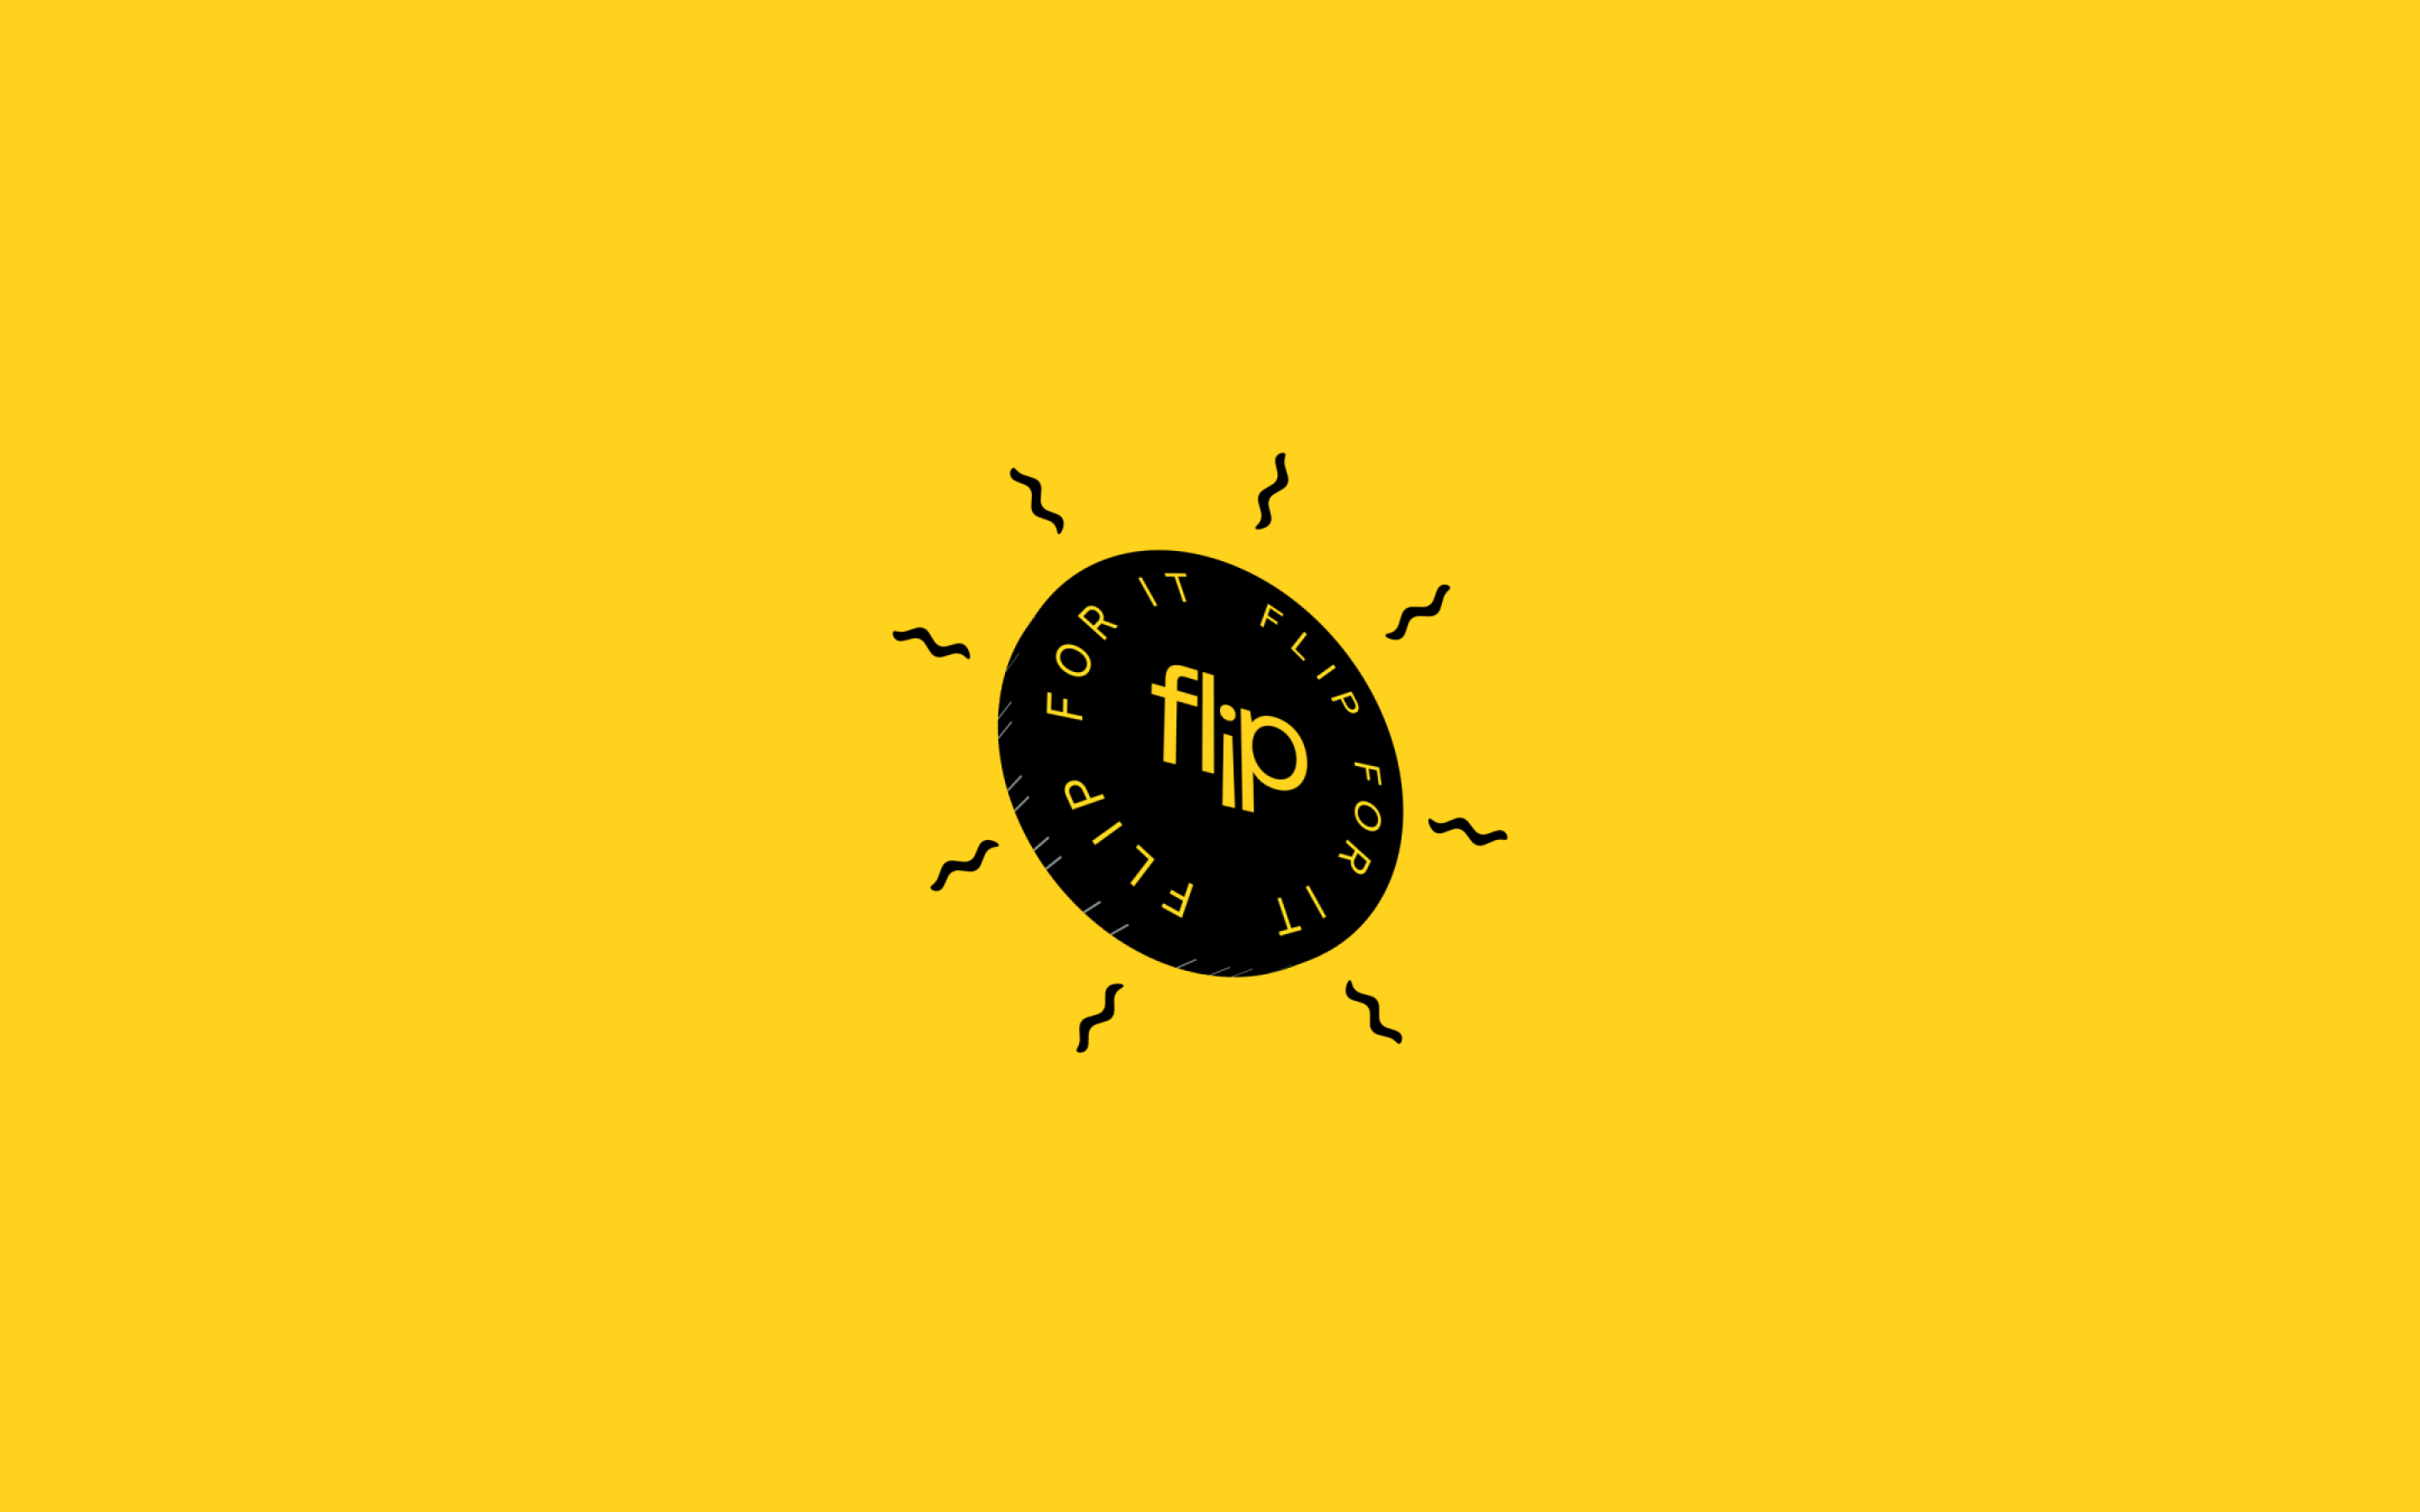 Flip logo - a 'flip' branded coin spinning on a yellow background